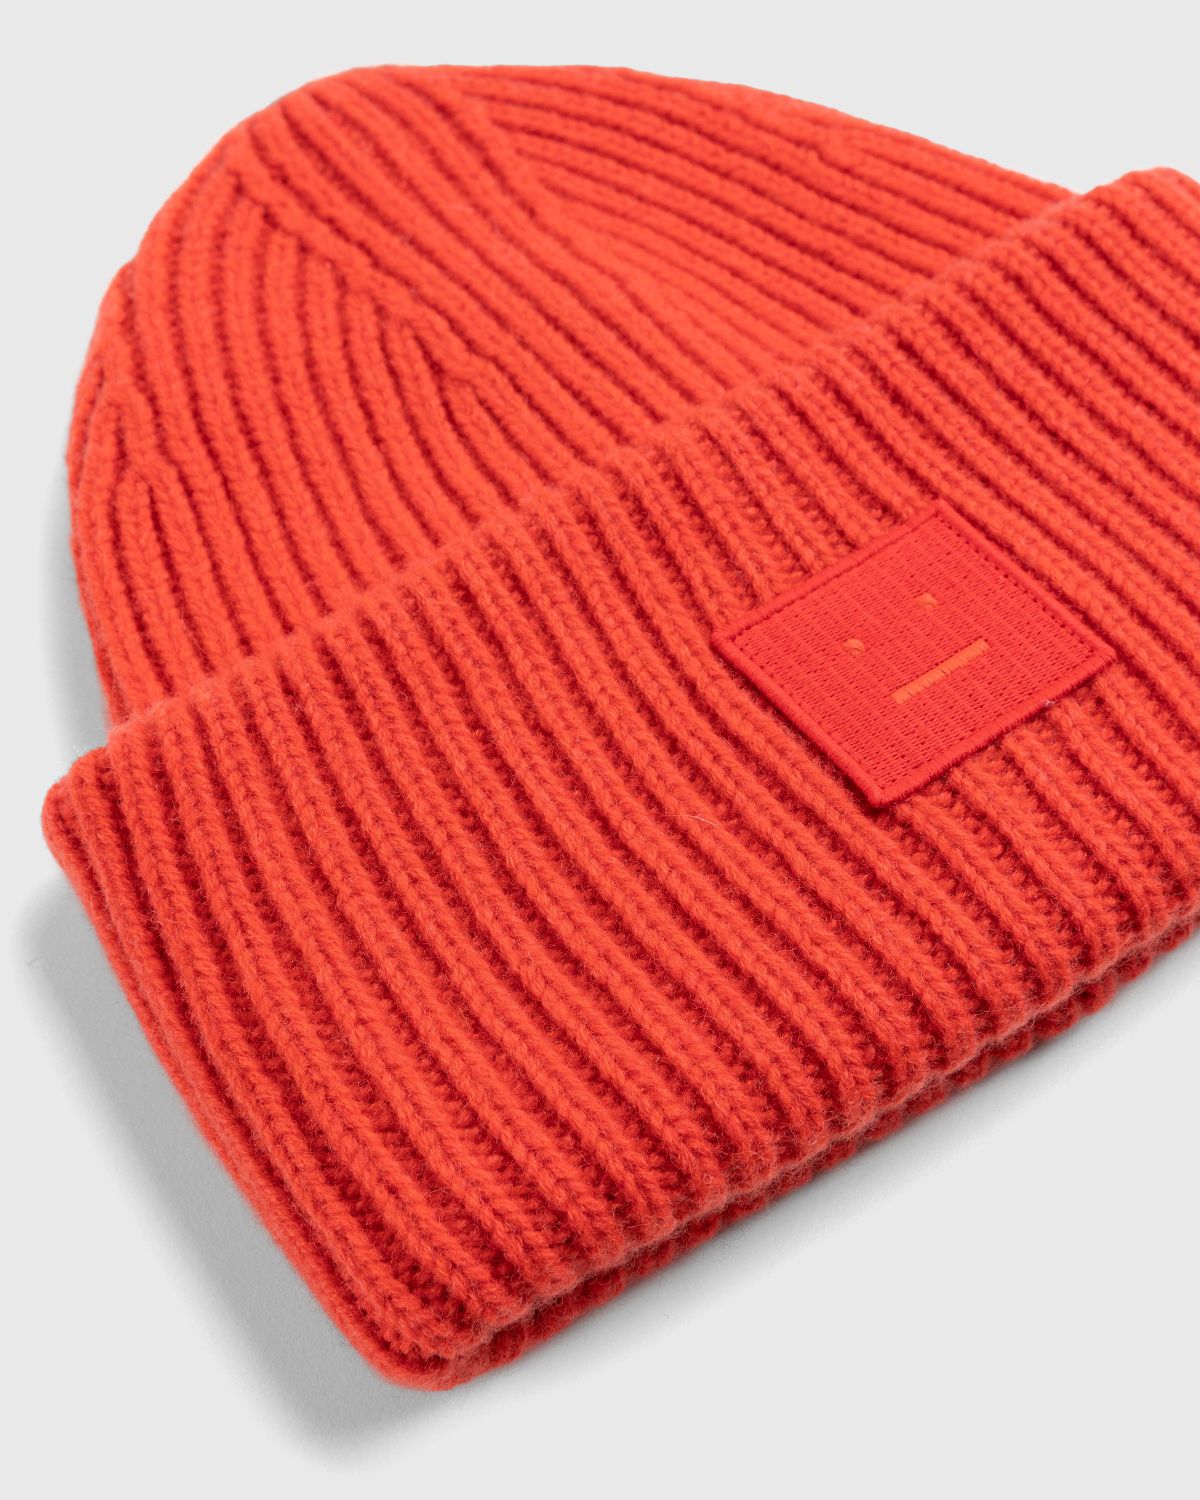 Acne Studios – Large Face Logo Beanie Red - Beanies - Red - Image 3